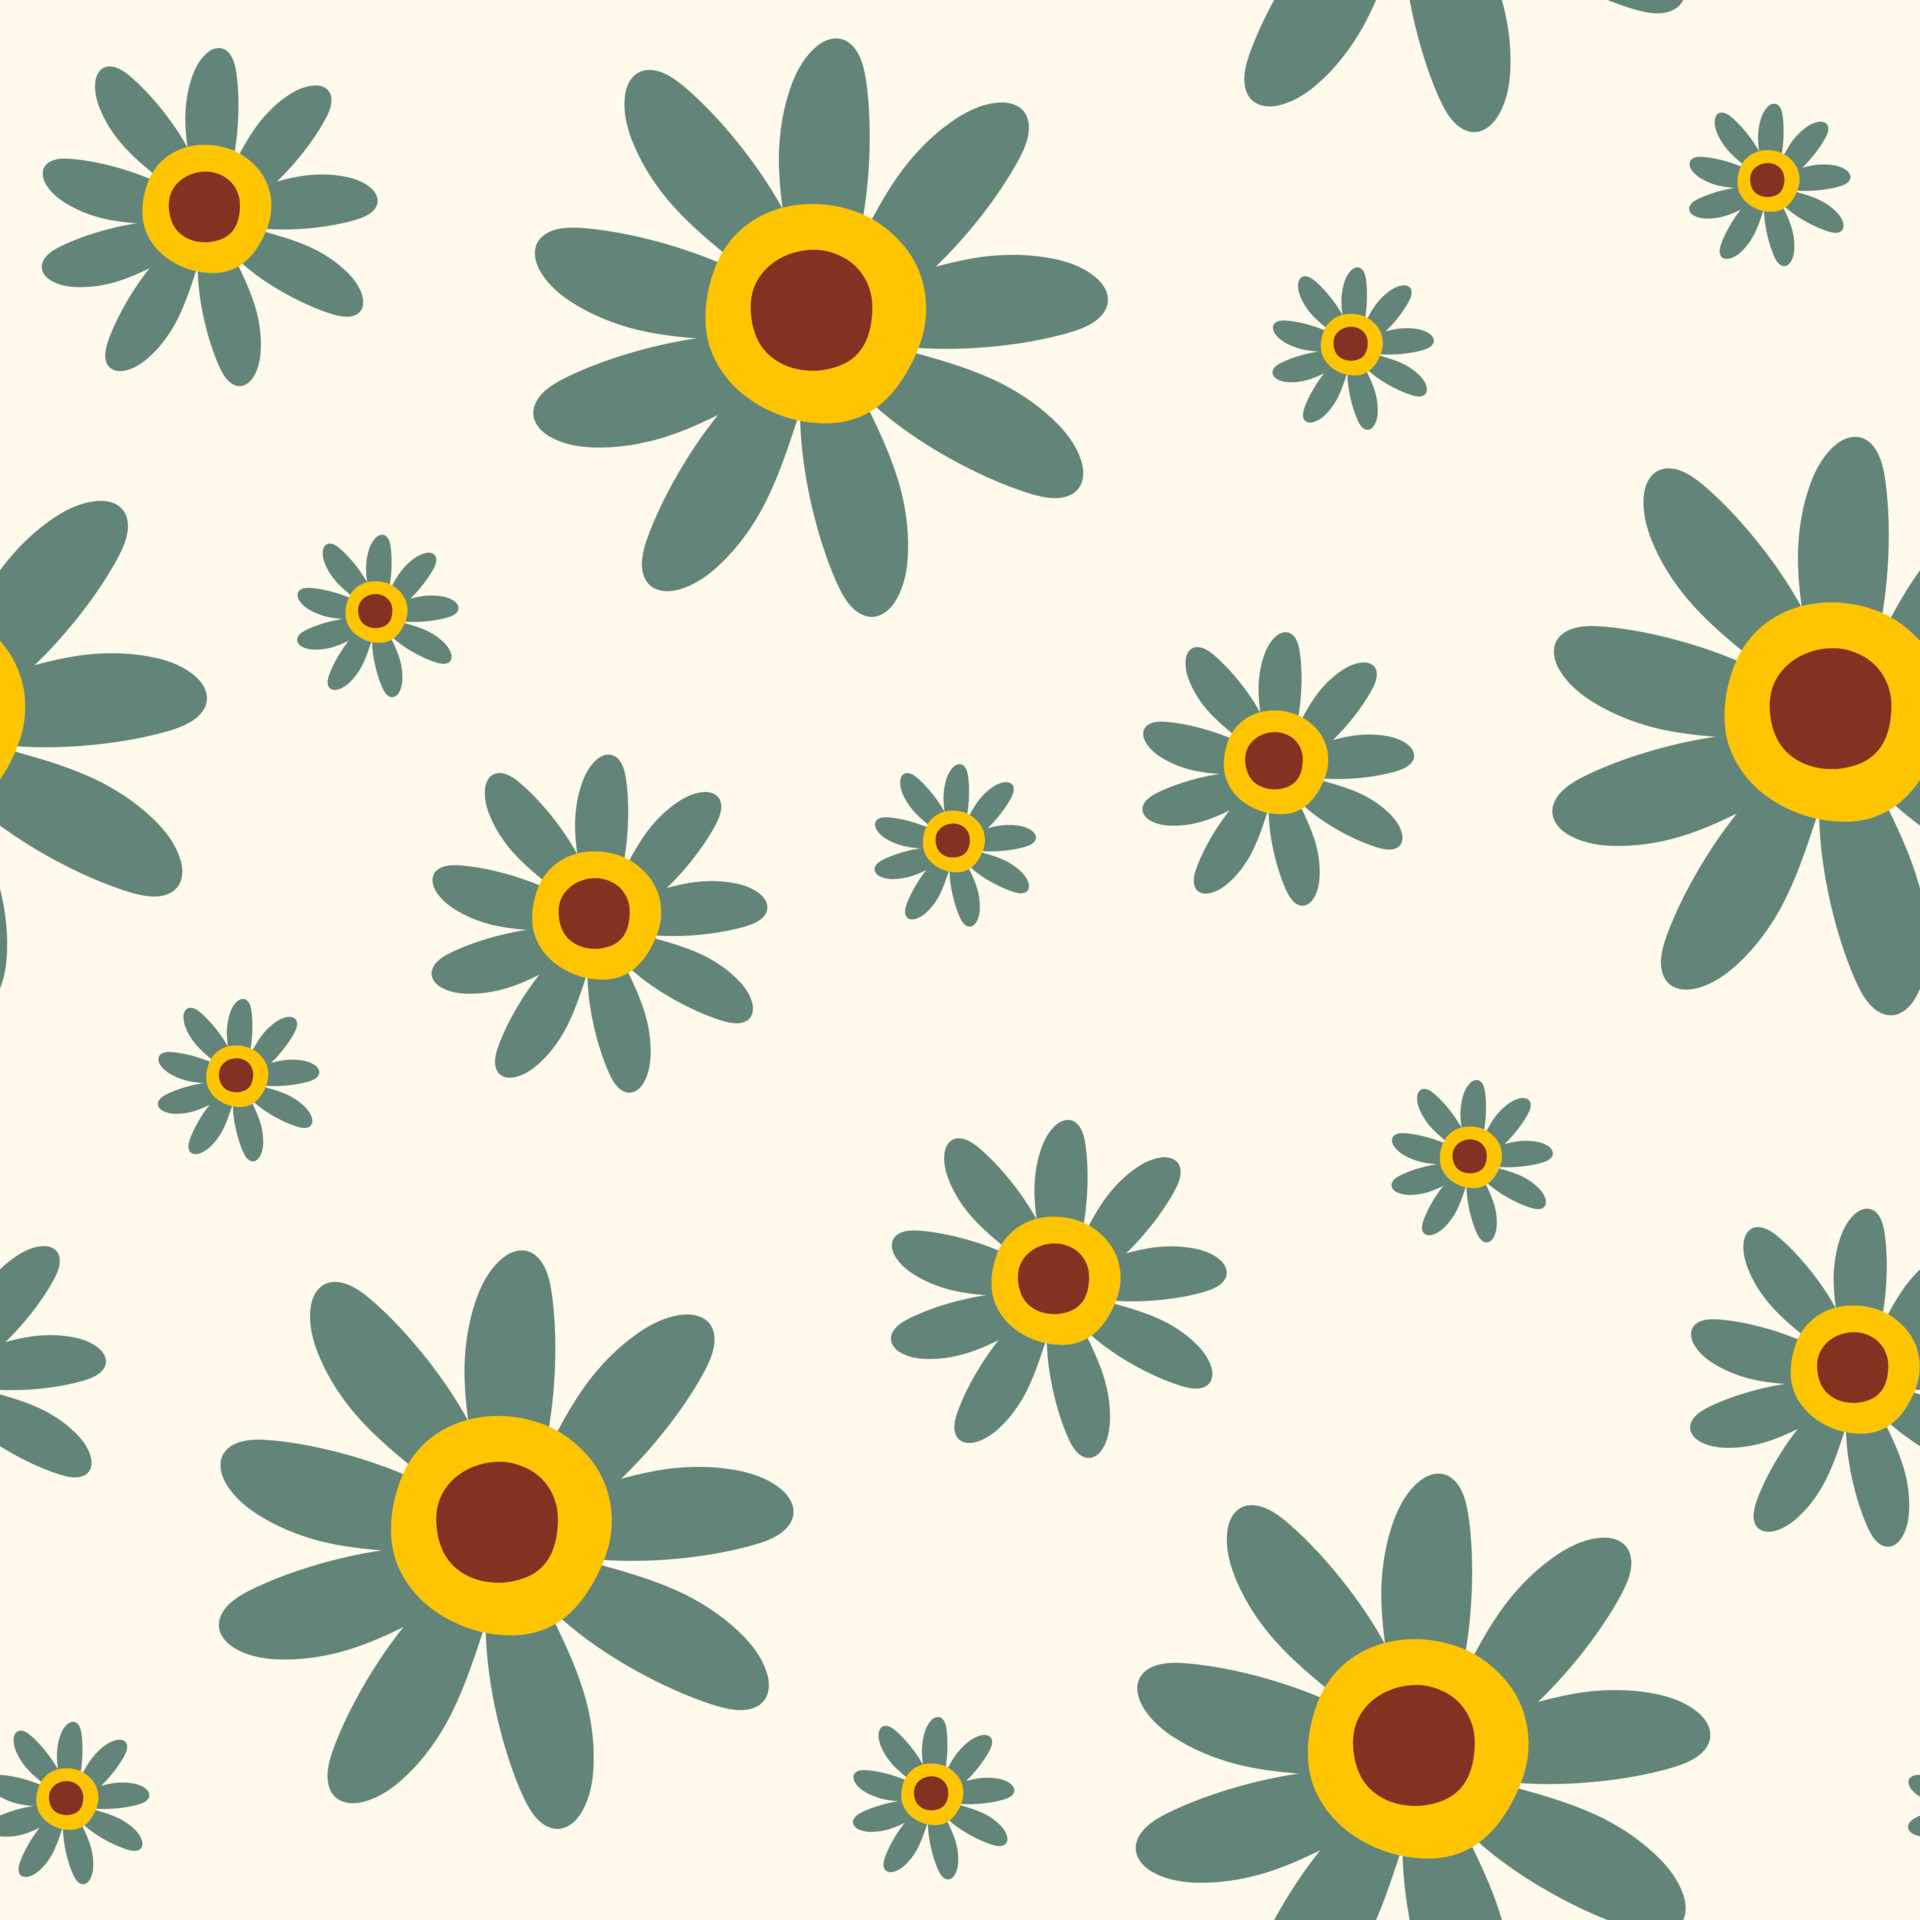 Groovy floral retro seamless pattern with daisy flowers on a light ...